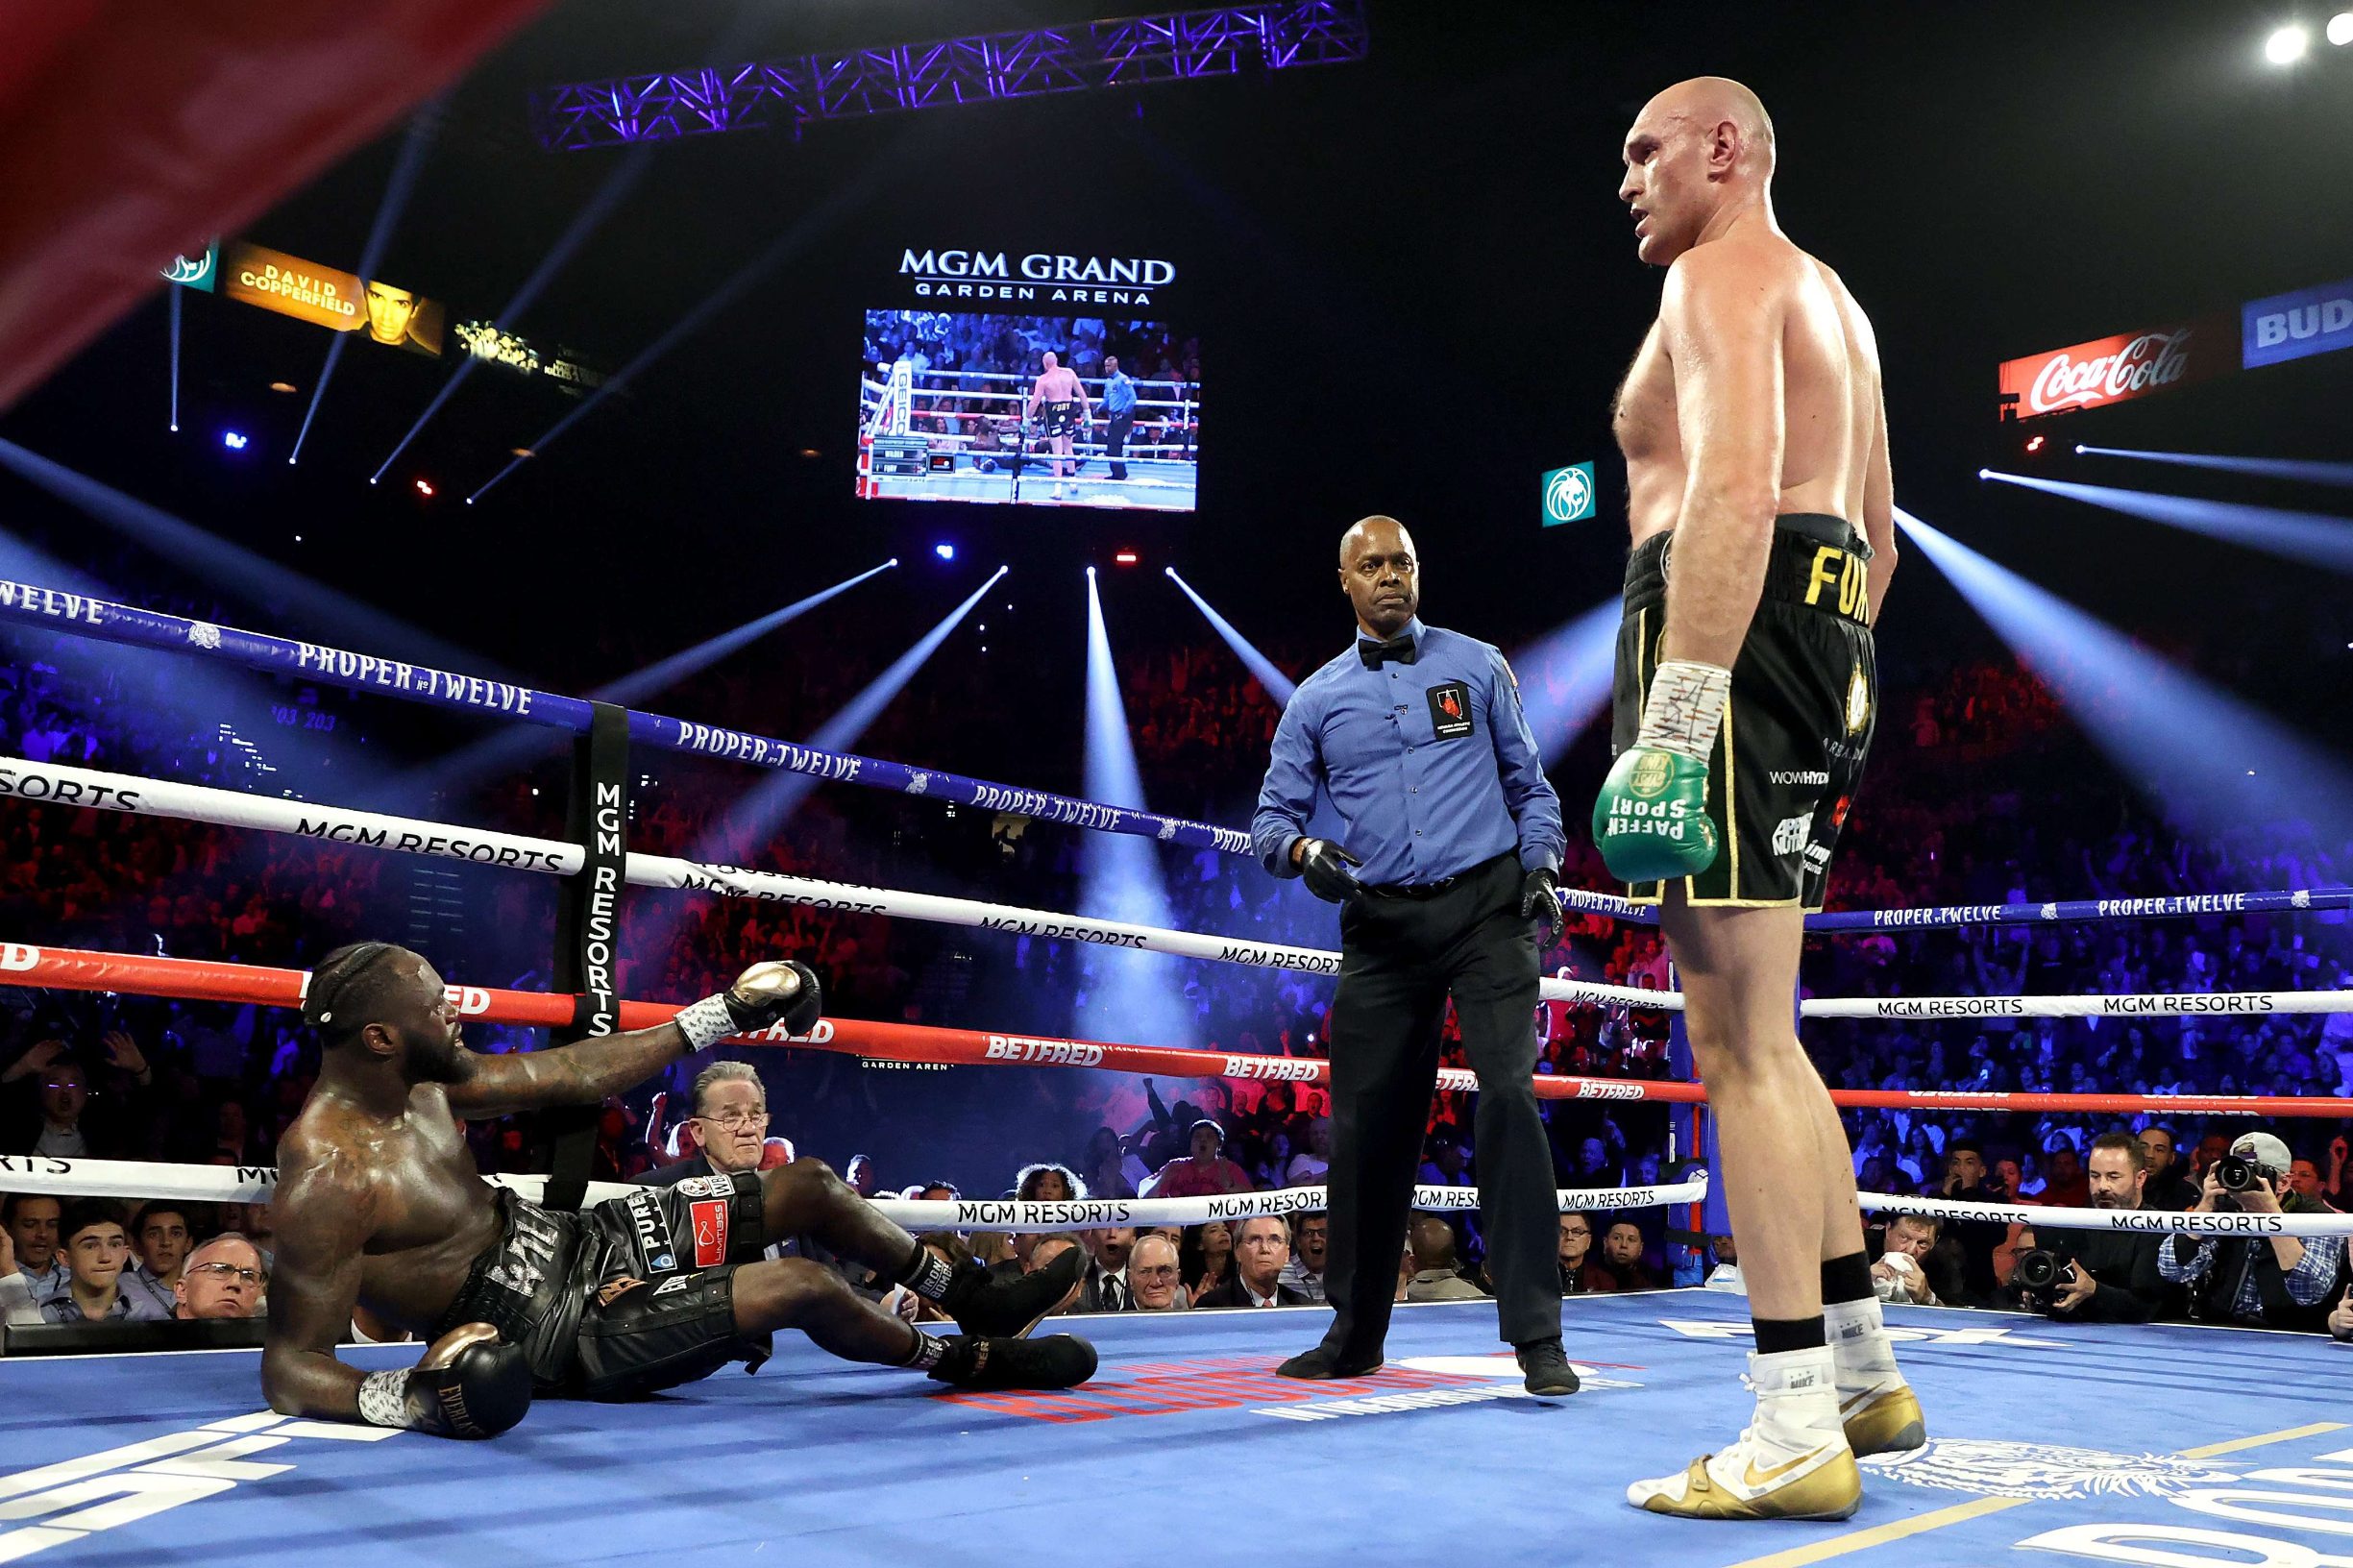 LAS VEGAS, NEVADA - FEBRUARY 22: Tyson Fury knocks down Deontay Wilder in the third round during their Heavyweight bout for Wilder's WBC and Fury's lineal heavyweight title on February 22, 2020 at MGM Grand Garden Arena in Las Vegas, Nevada.   Al Bello/Getty Images/AFP
== FOR NEWSPAPERS, INTERNET, TELCOS & TELEVISION USE ONLY ==